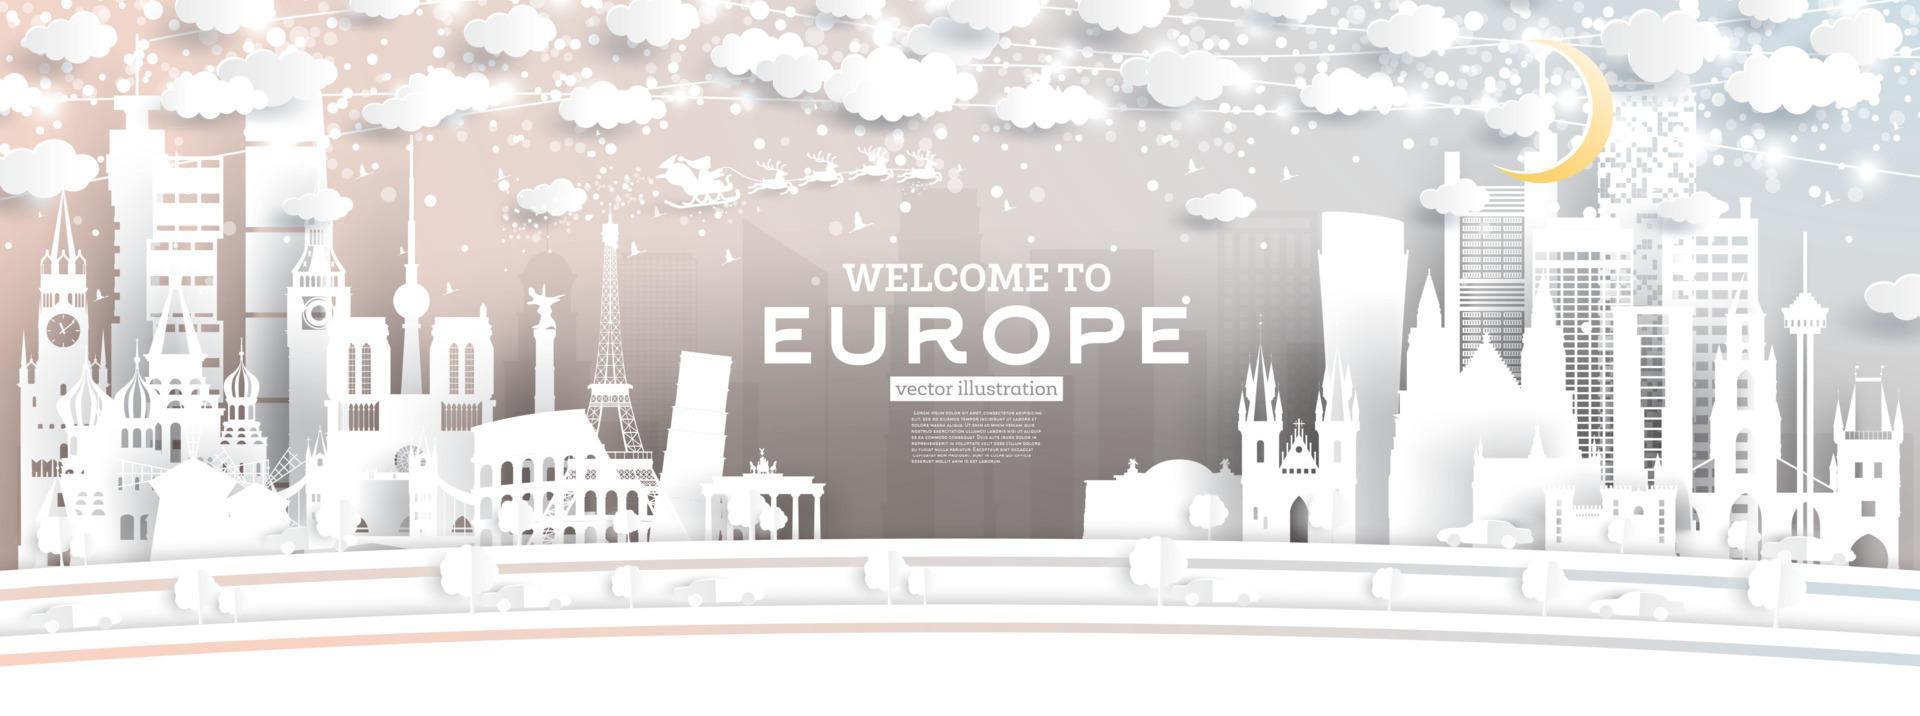 Europe City Skyline in Paper Cut Style with Snowflakes, Moon and Neon Garland. vector